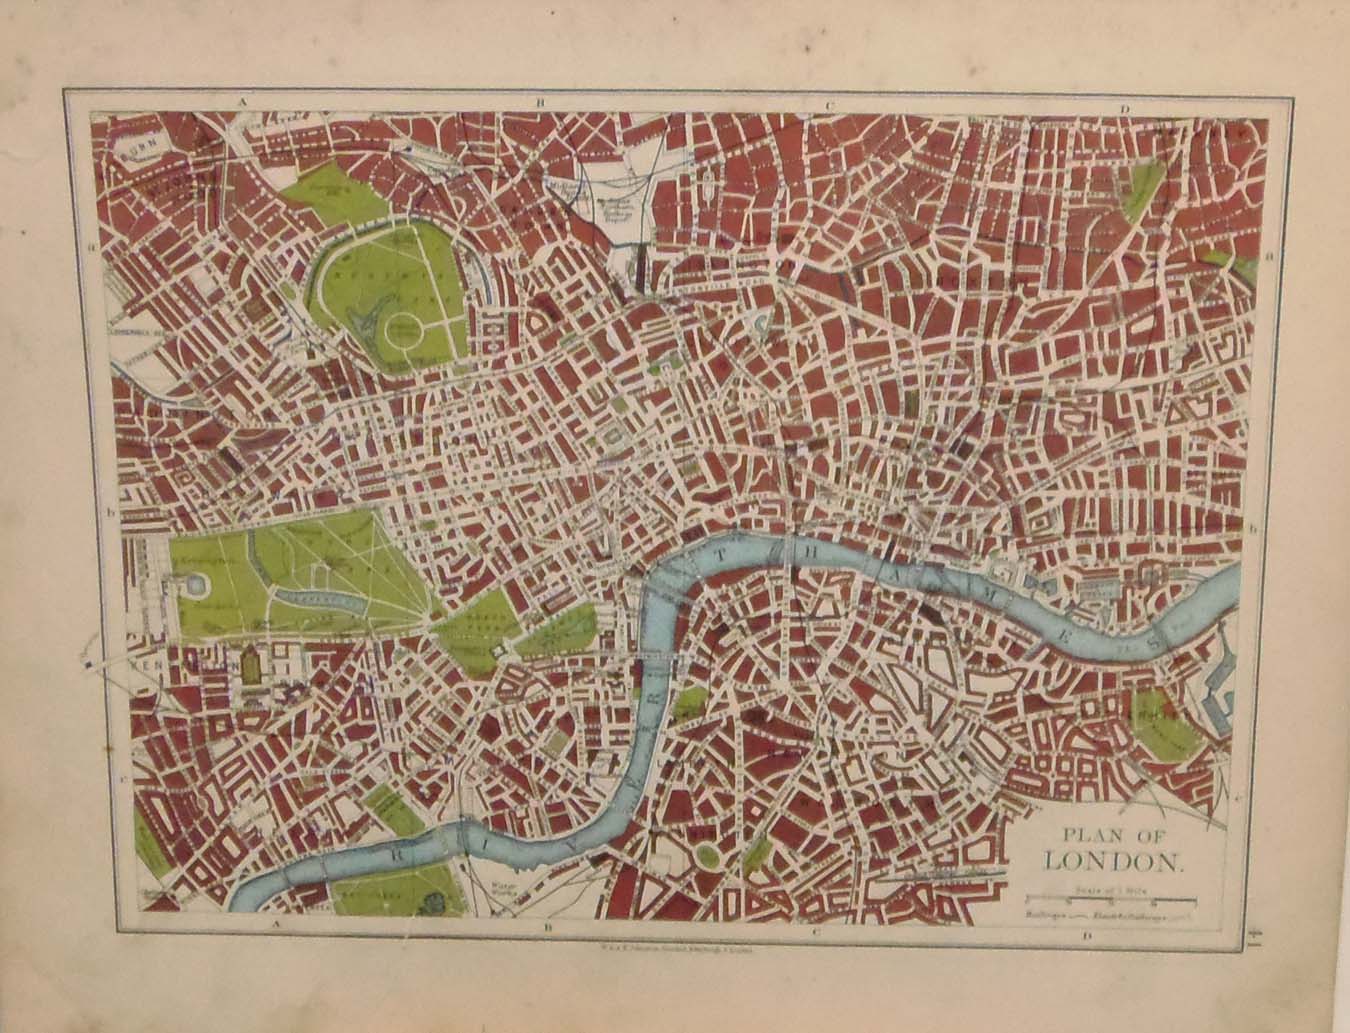 Antique plan of London from 1905. There is plans showing Dublin, London and others on the reverse.